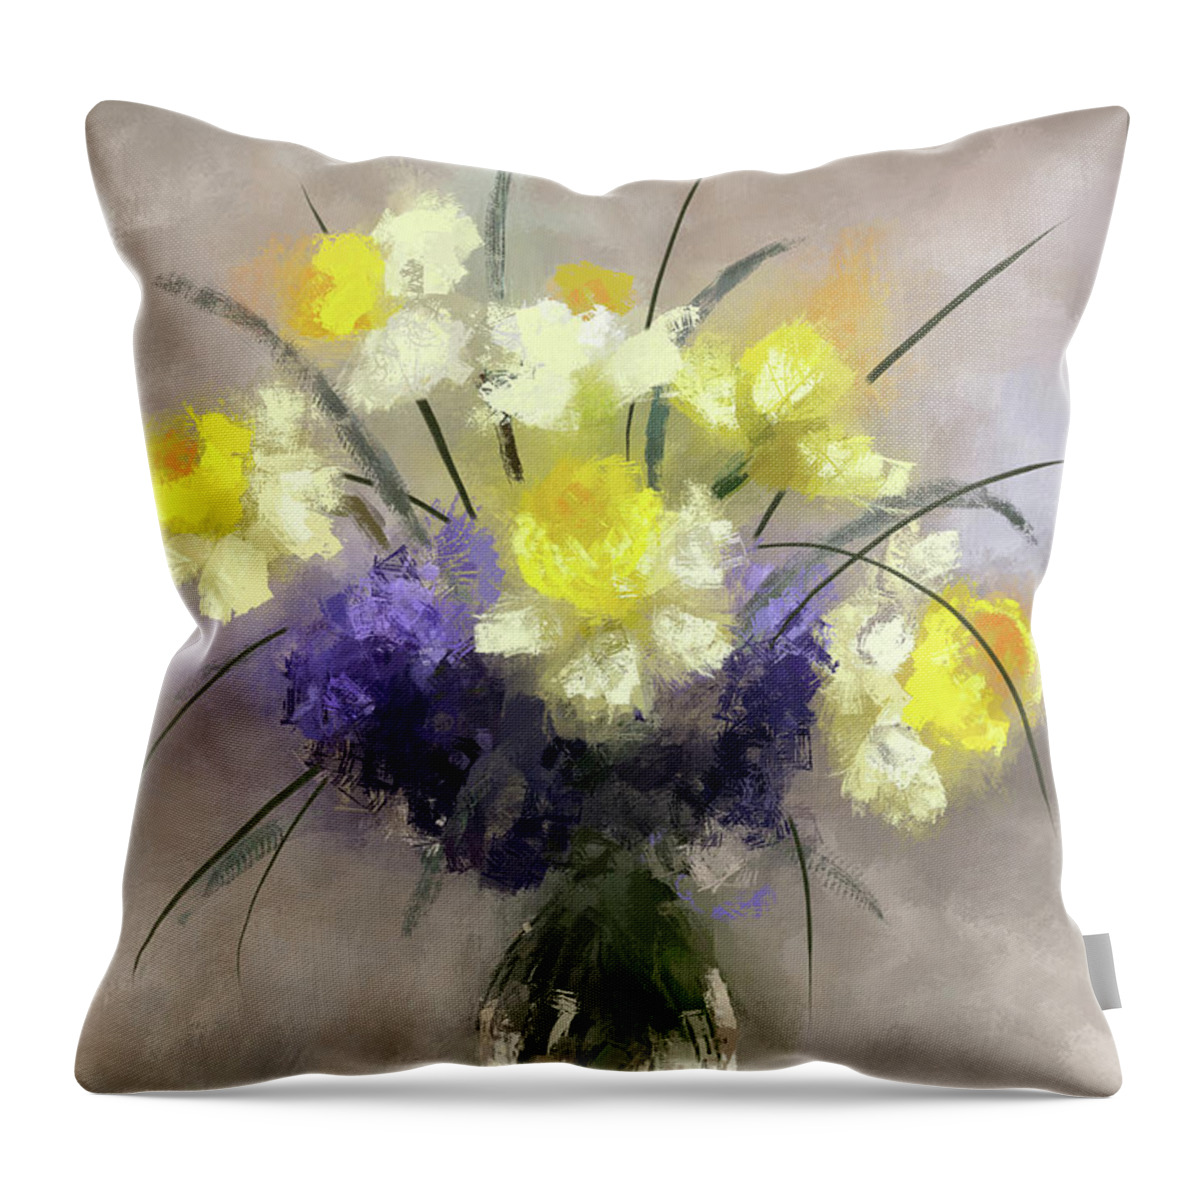 Flowers Throw Pillow featuring the digital art Flowers For Maria by Lois Bryan